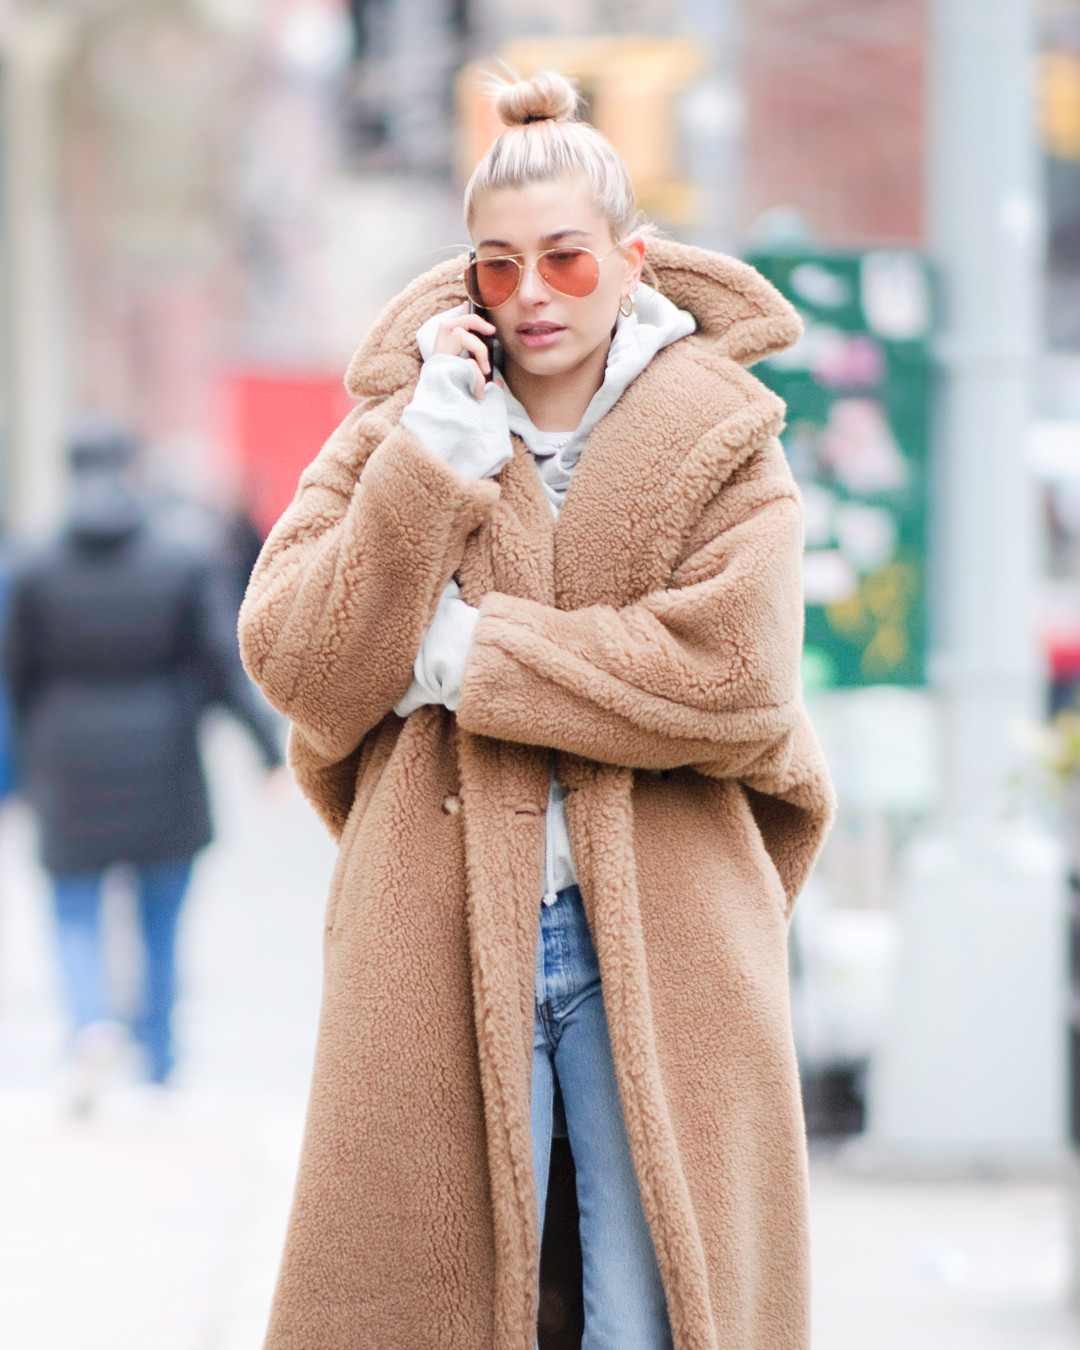 Hailey Baldwin's Cozy Outfit Is for Netflix and Chillin' - E! Online